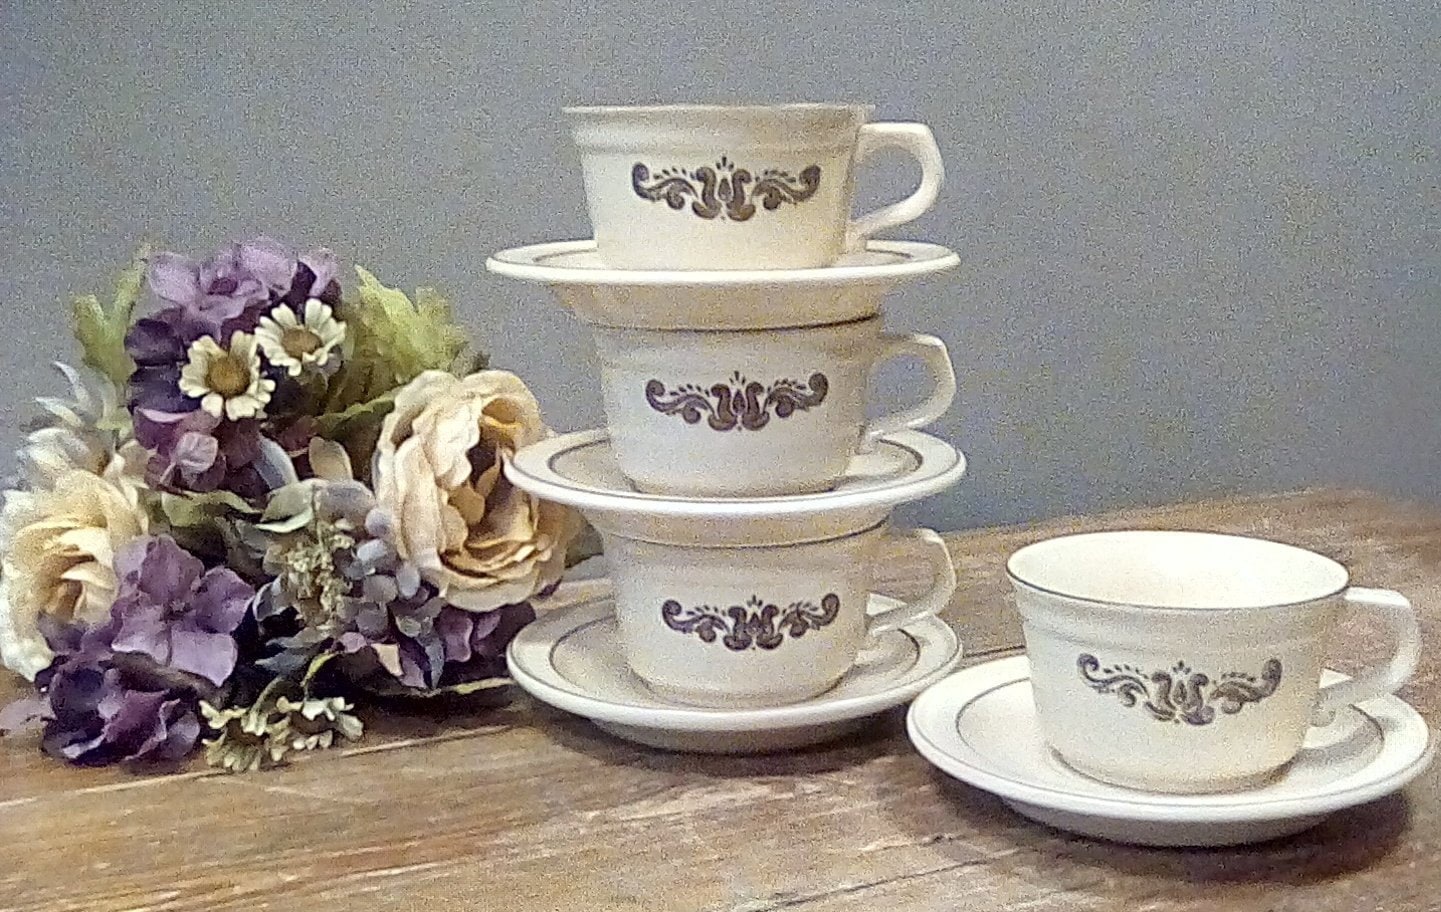 Vintage Cups and Saucers Village Pattern Retired from the 1960s Pfaltzgraff Cups and Saucers Plus 16 Extra Cups